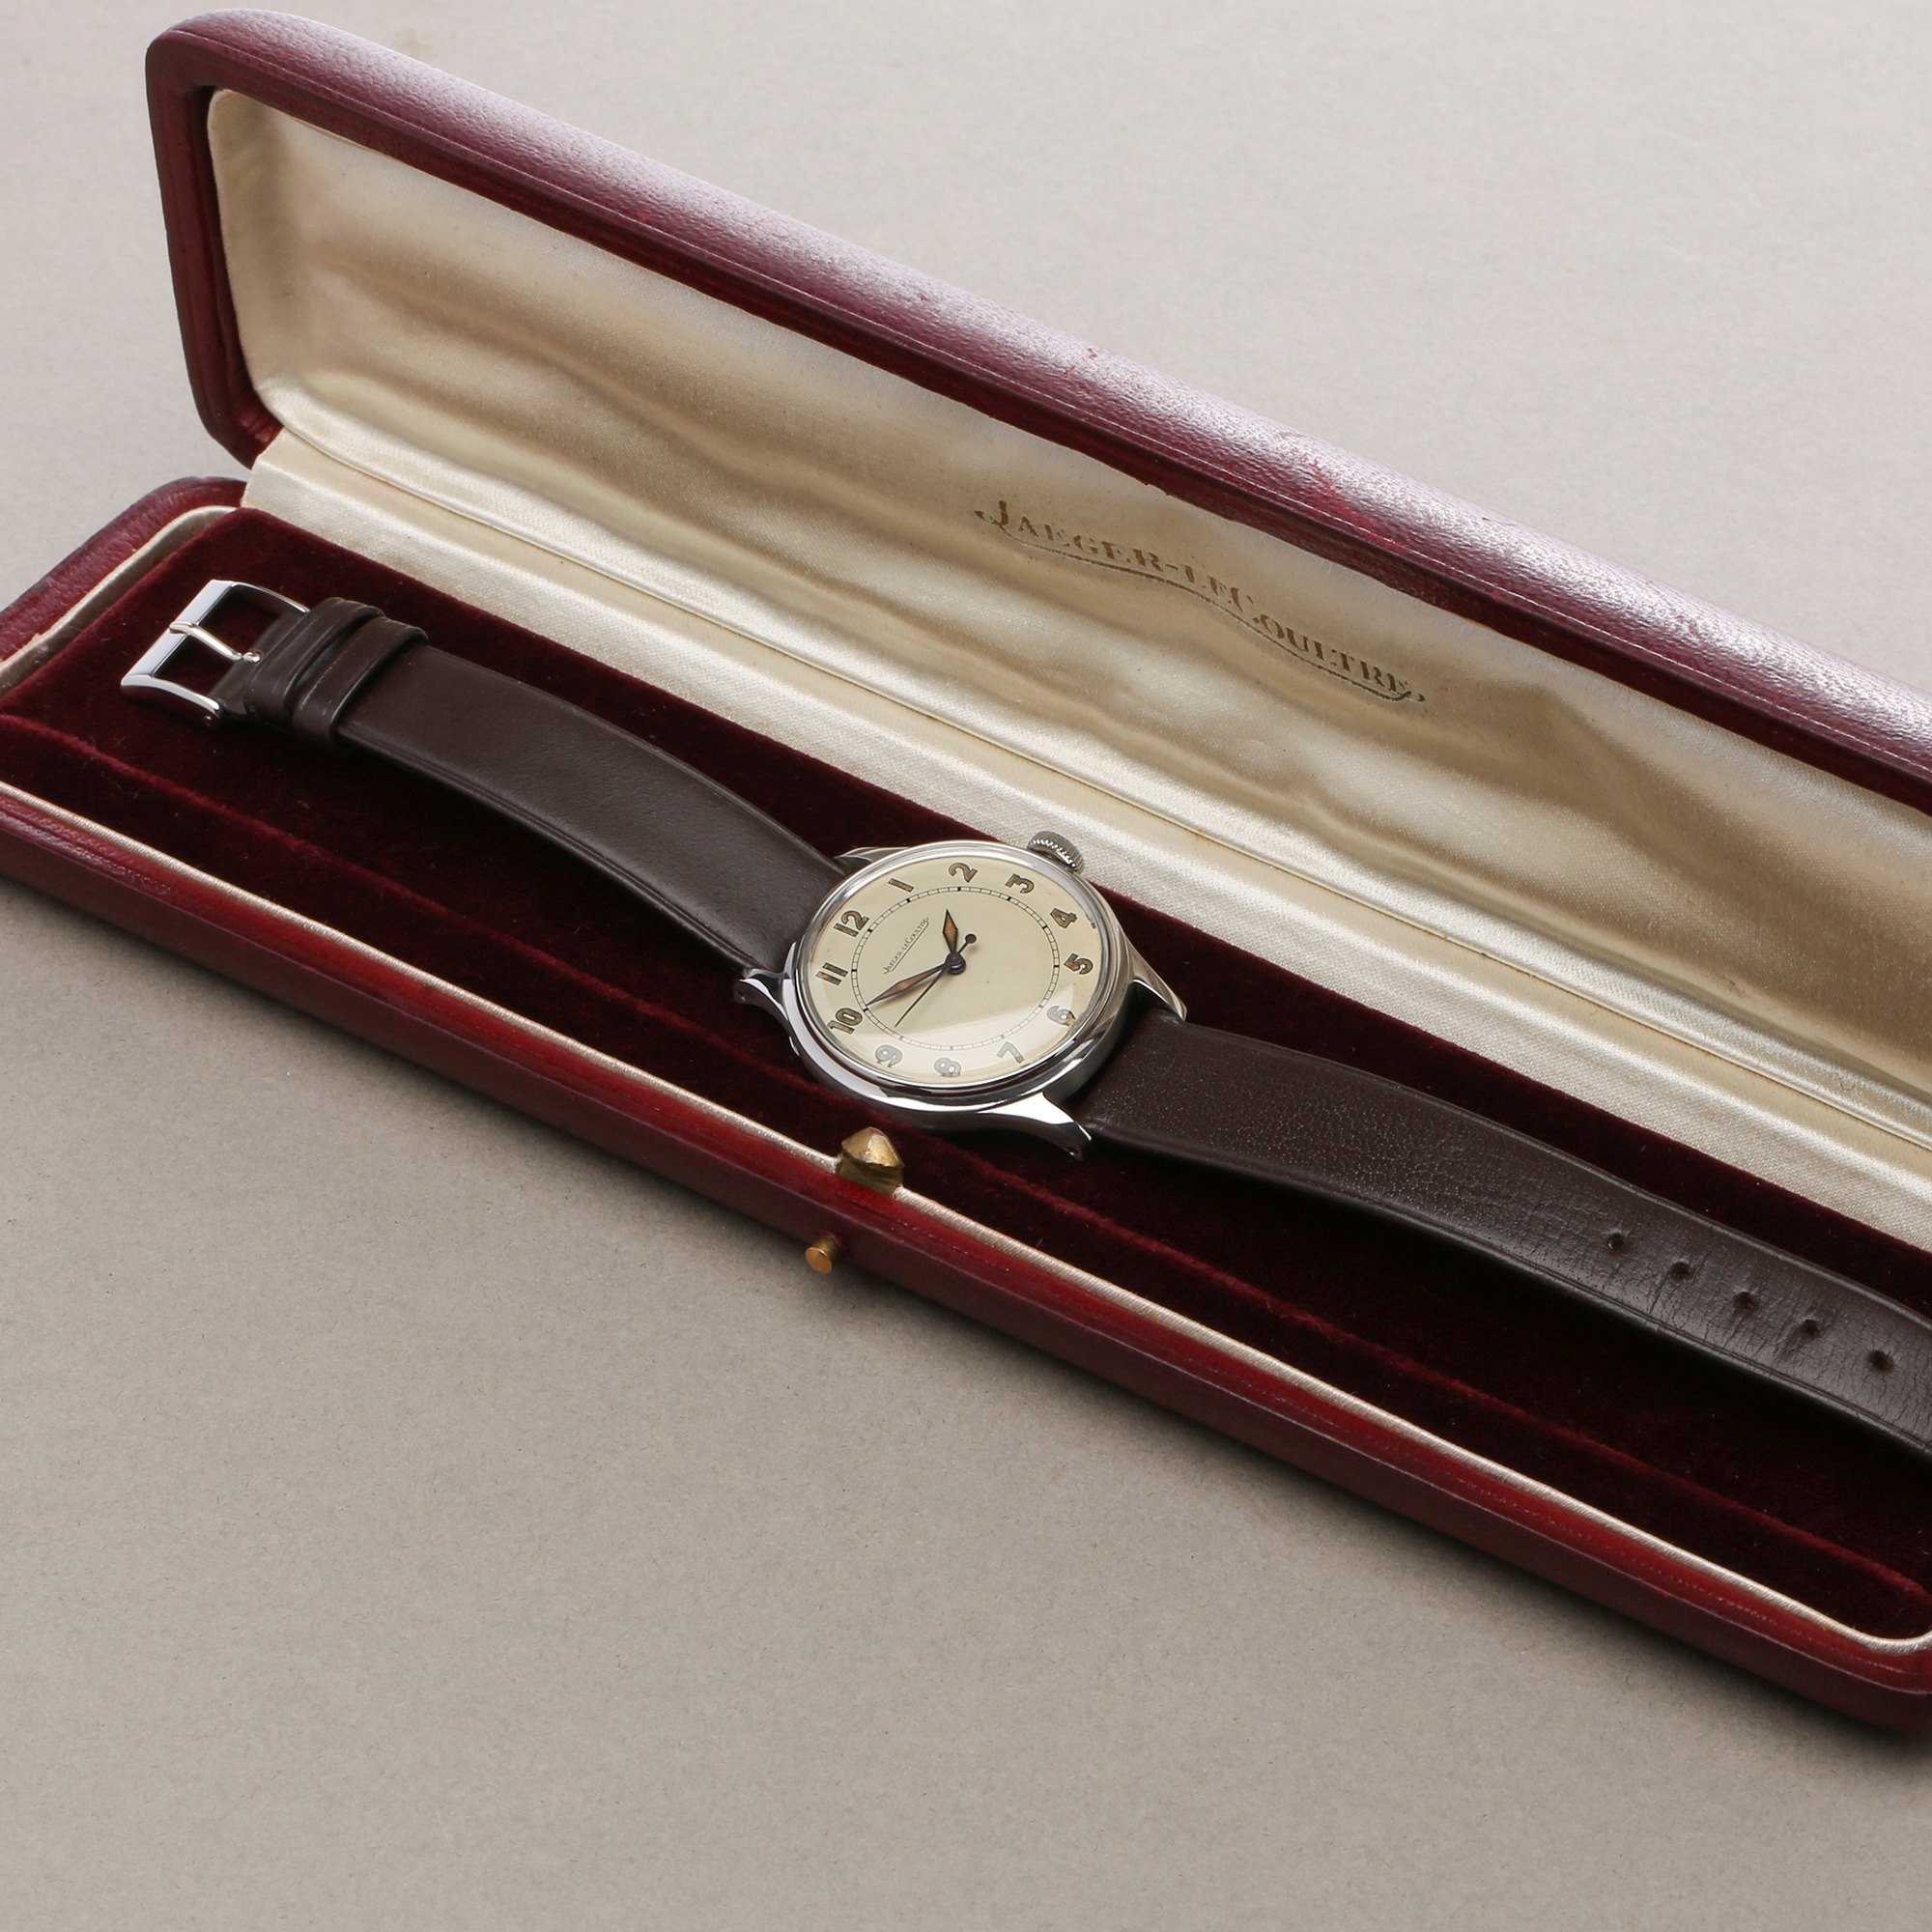 Jaeger-LeCoultre Vintage Stainless Steel P478